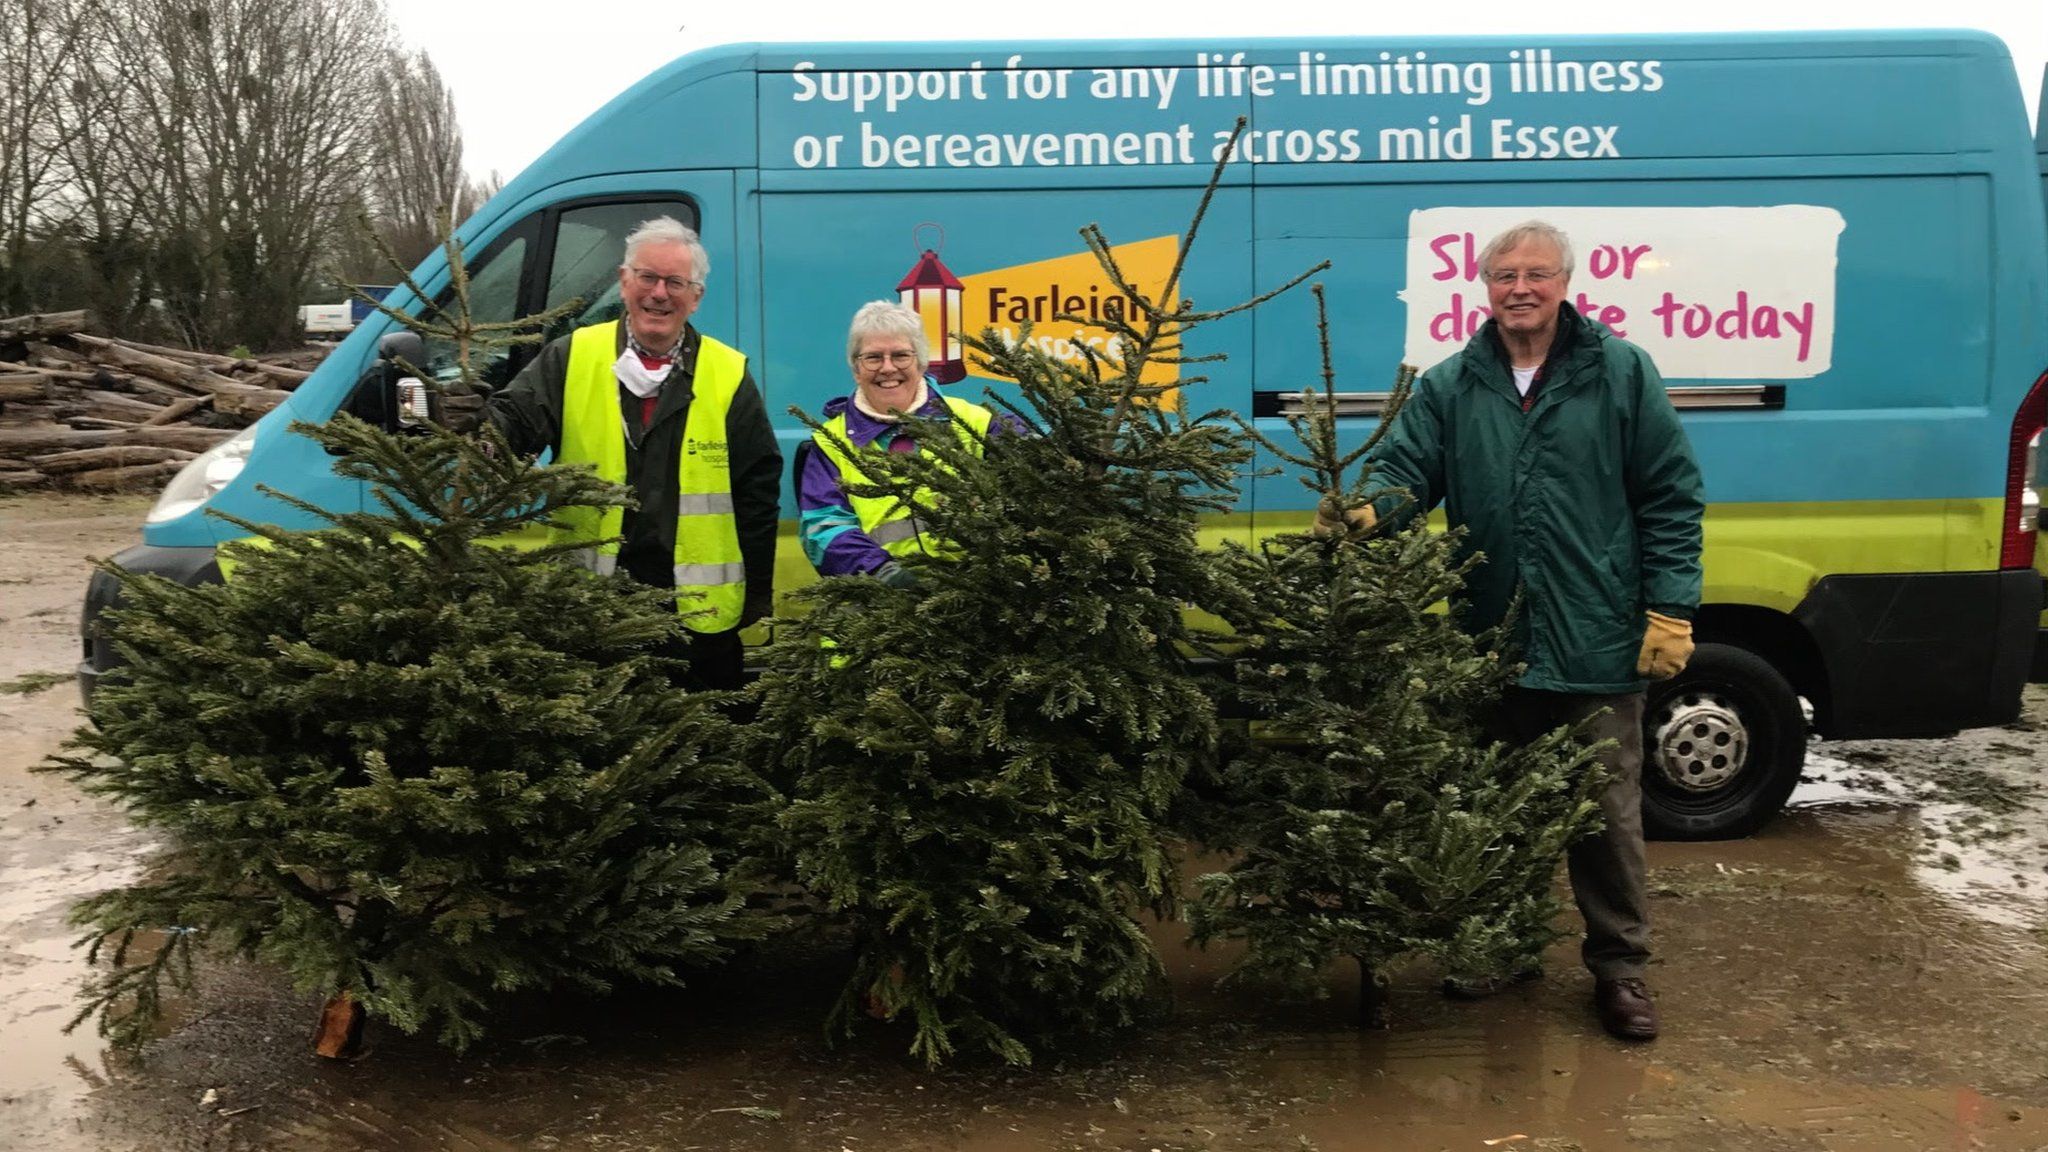 Farleigh Hospice staff standing in front of a van along with some of the donated Christmas trees.